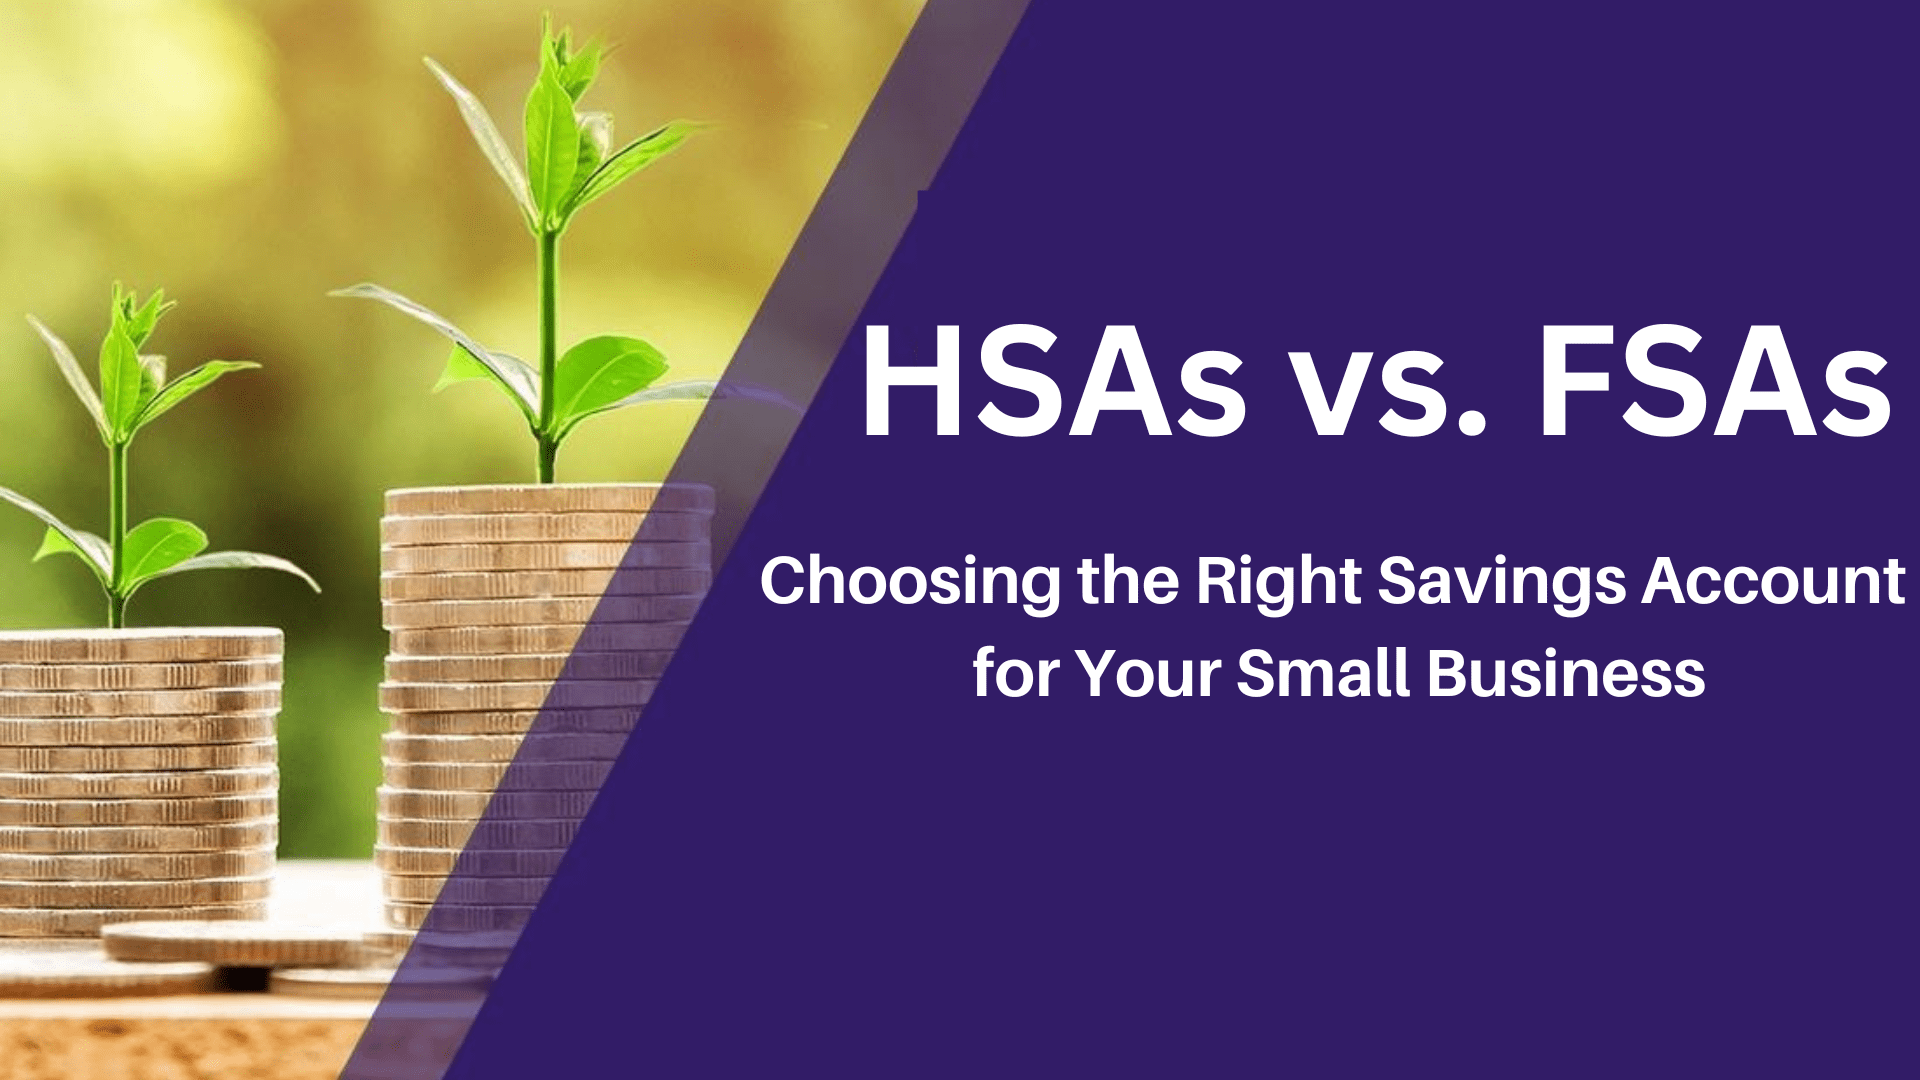 You are currently viewing HSAs vs. FSAs: Choosing the Right Savings Account for Your Small Business